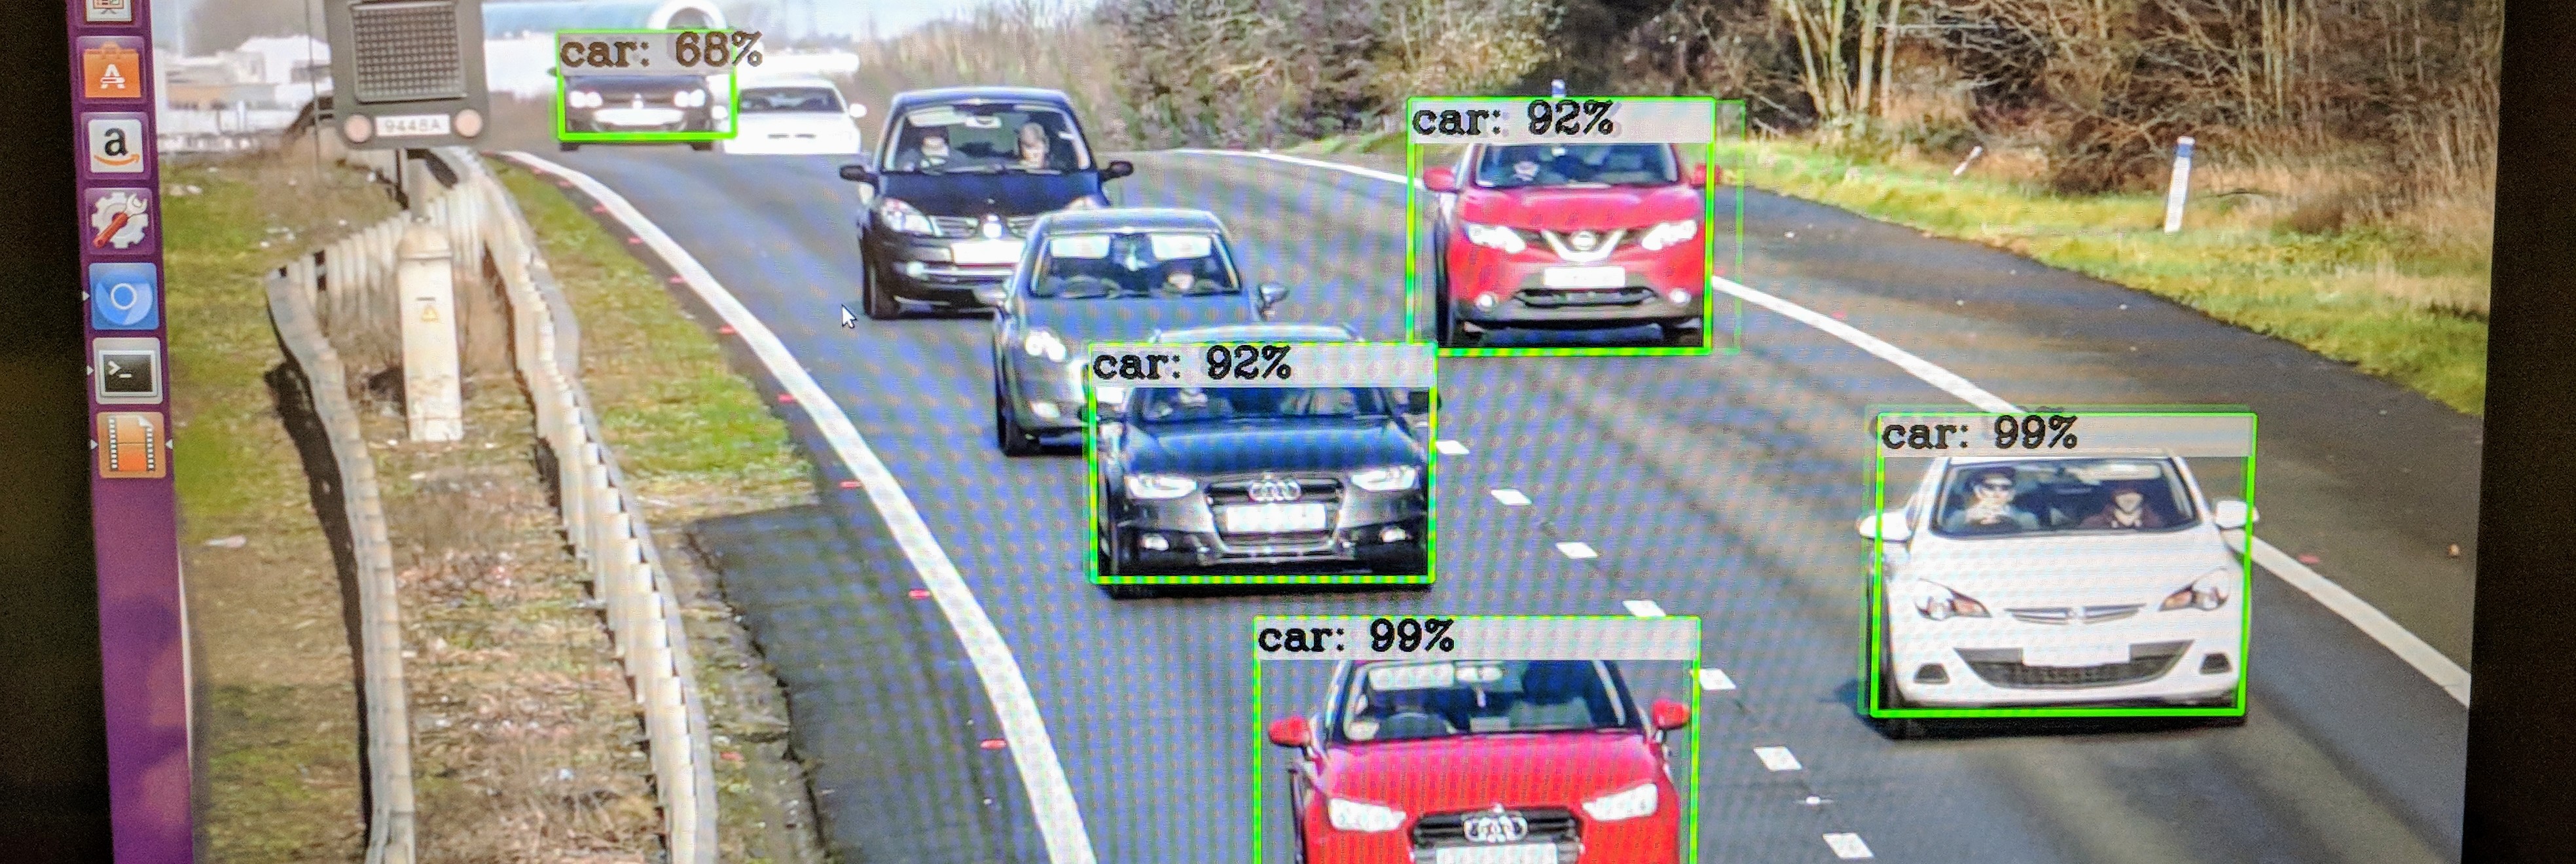 Object Detection Results